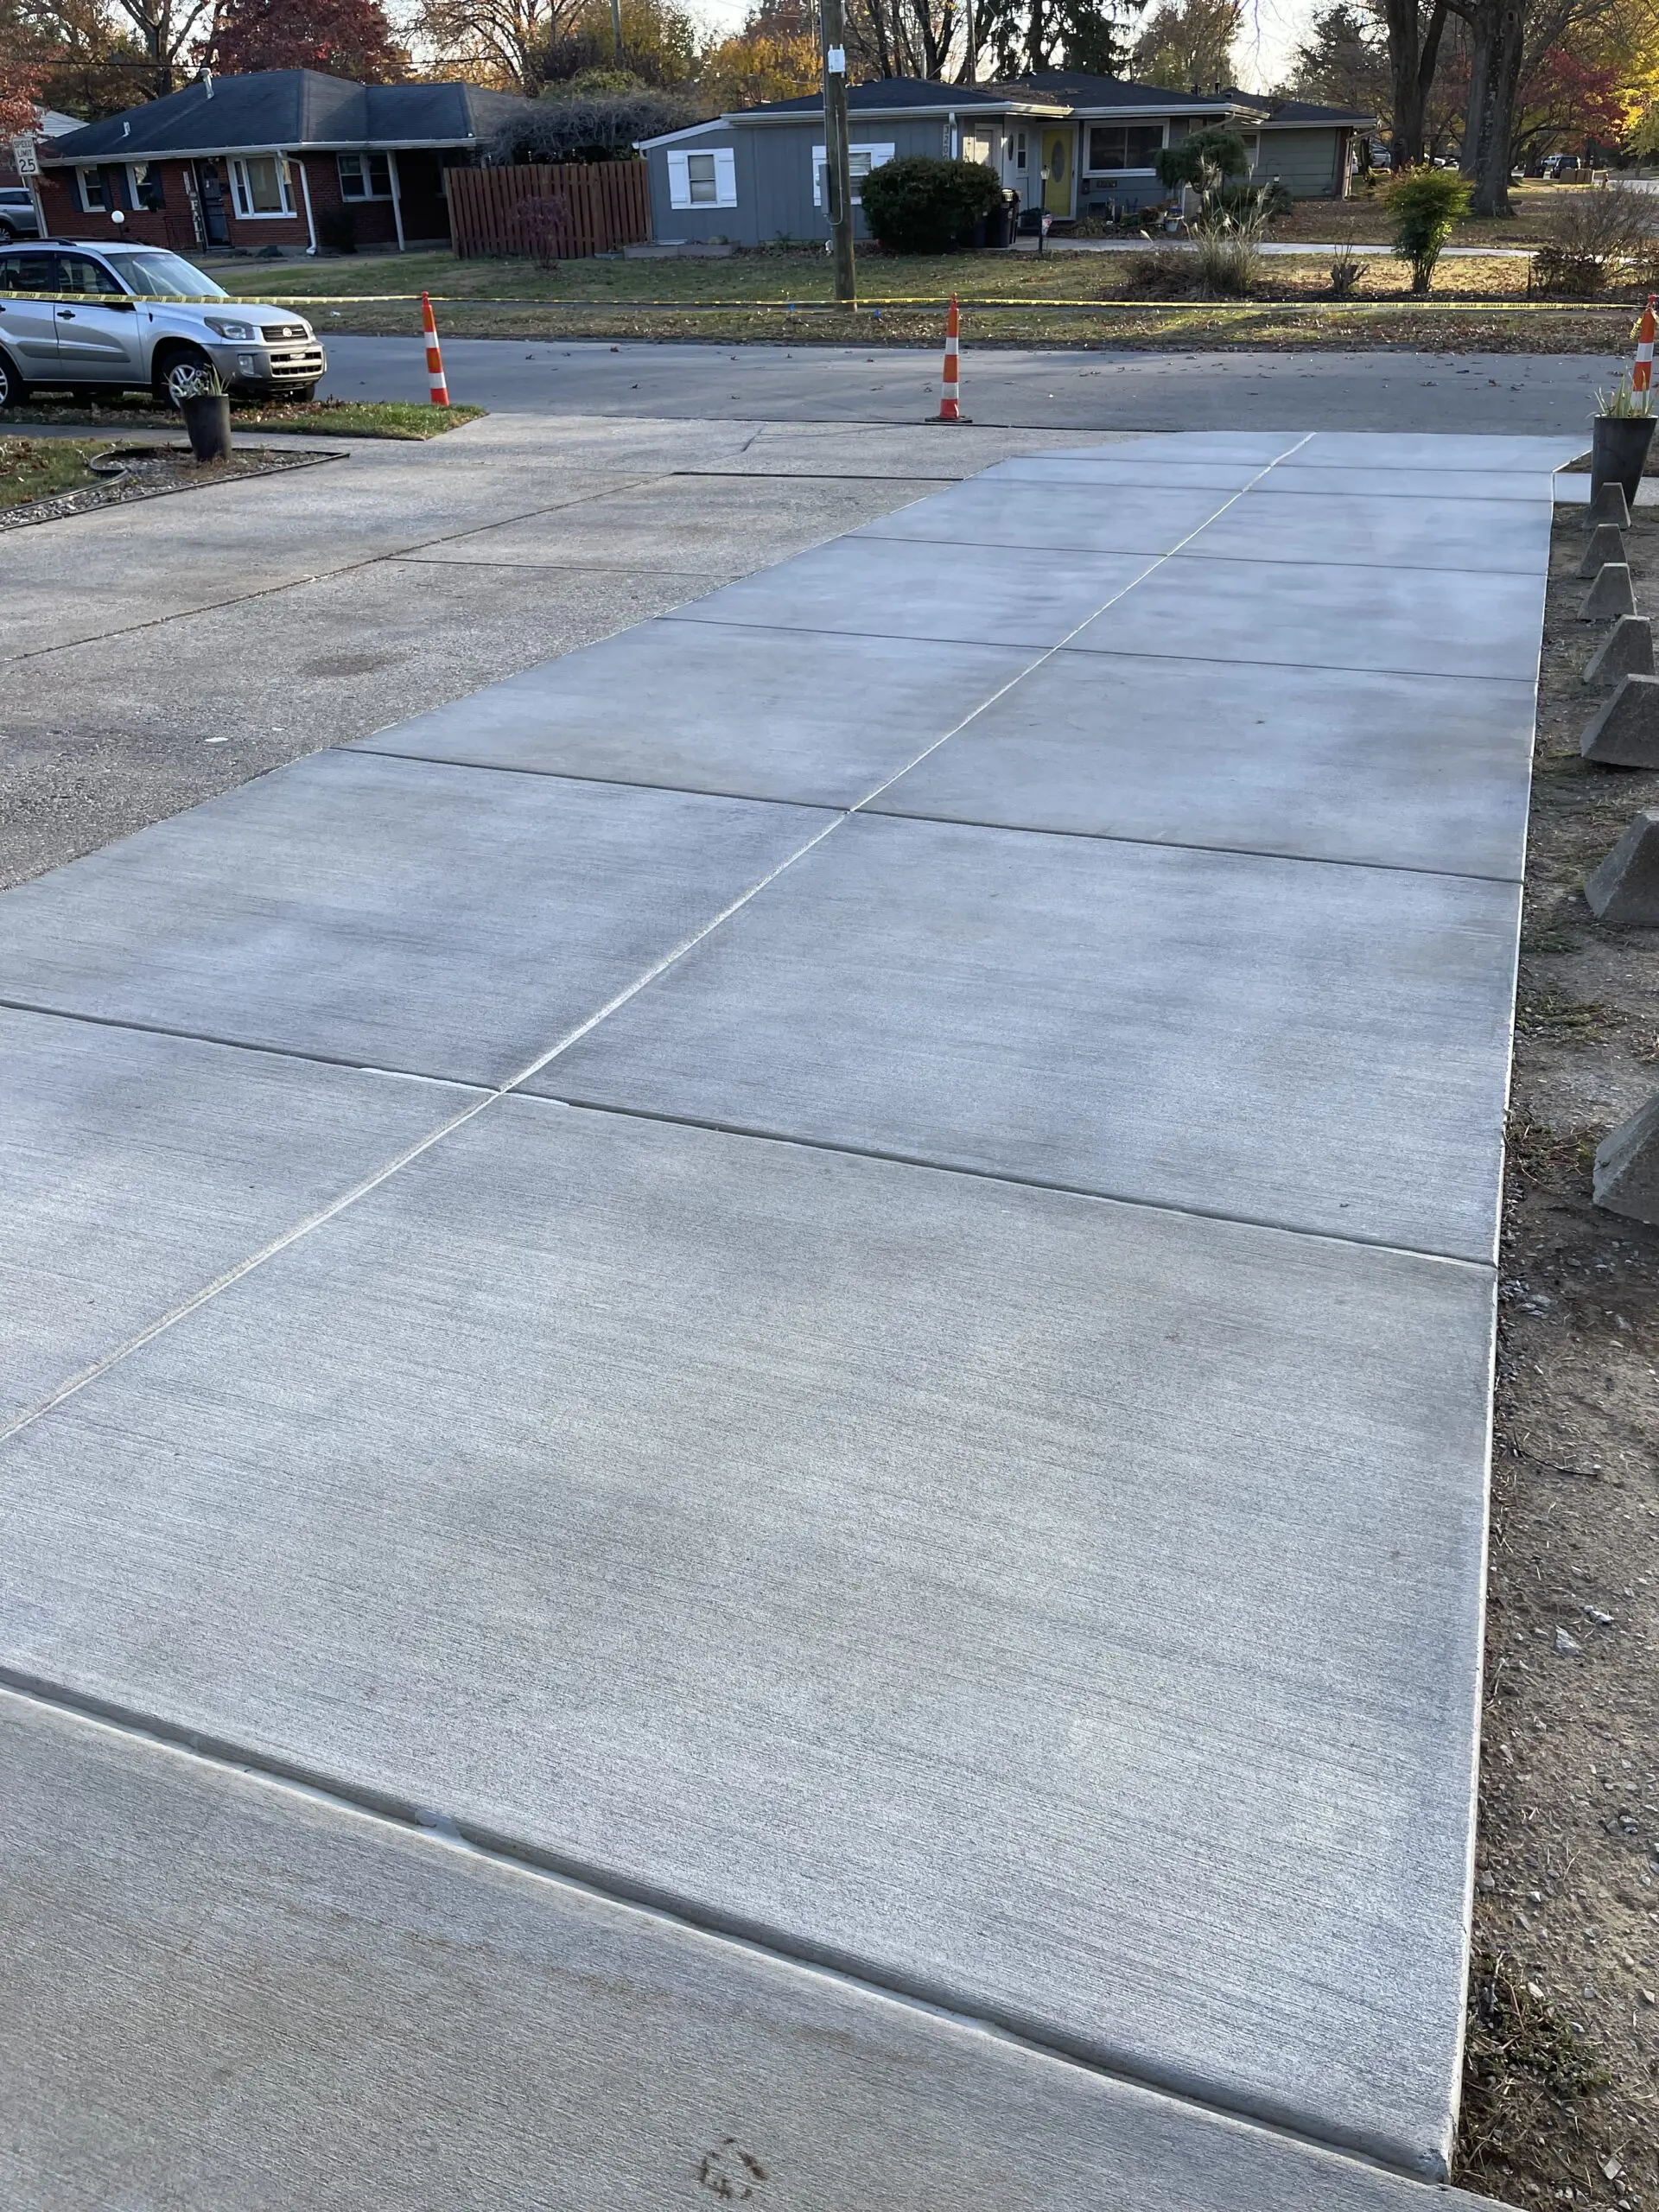 Unstained broomed concrete driveway in its original light grey color before the application of the stain.